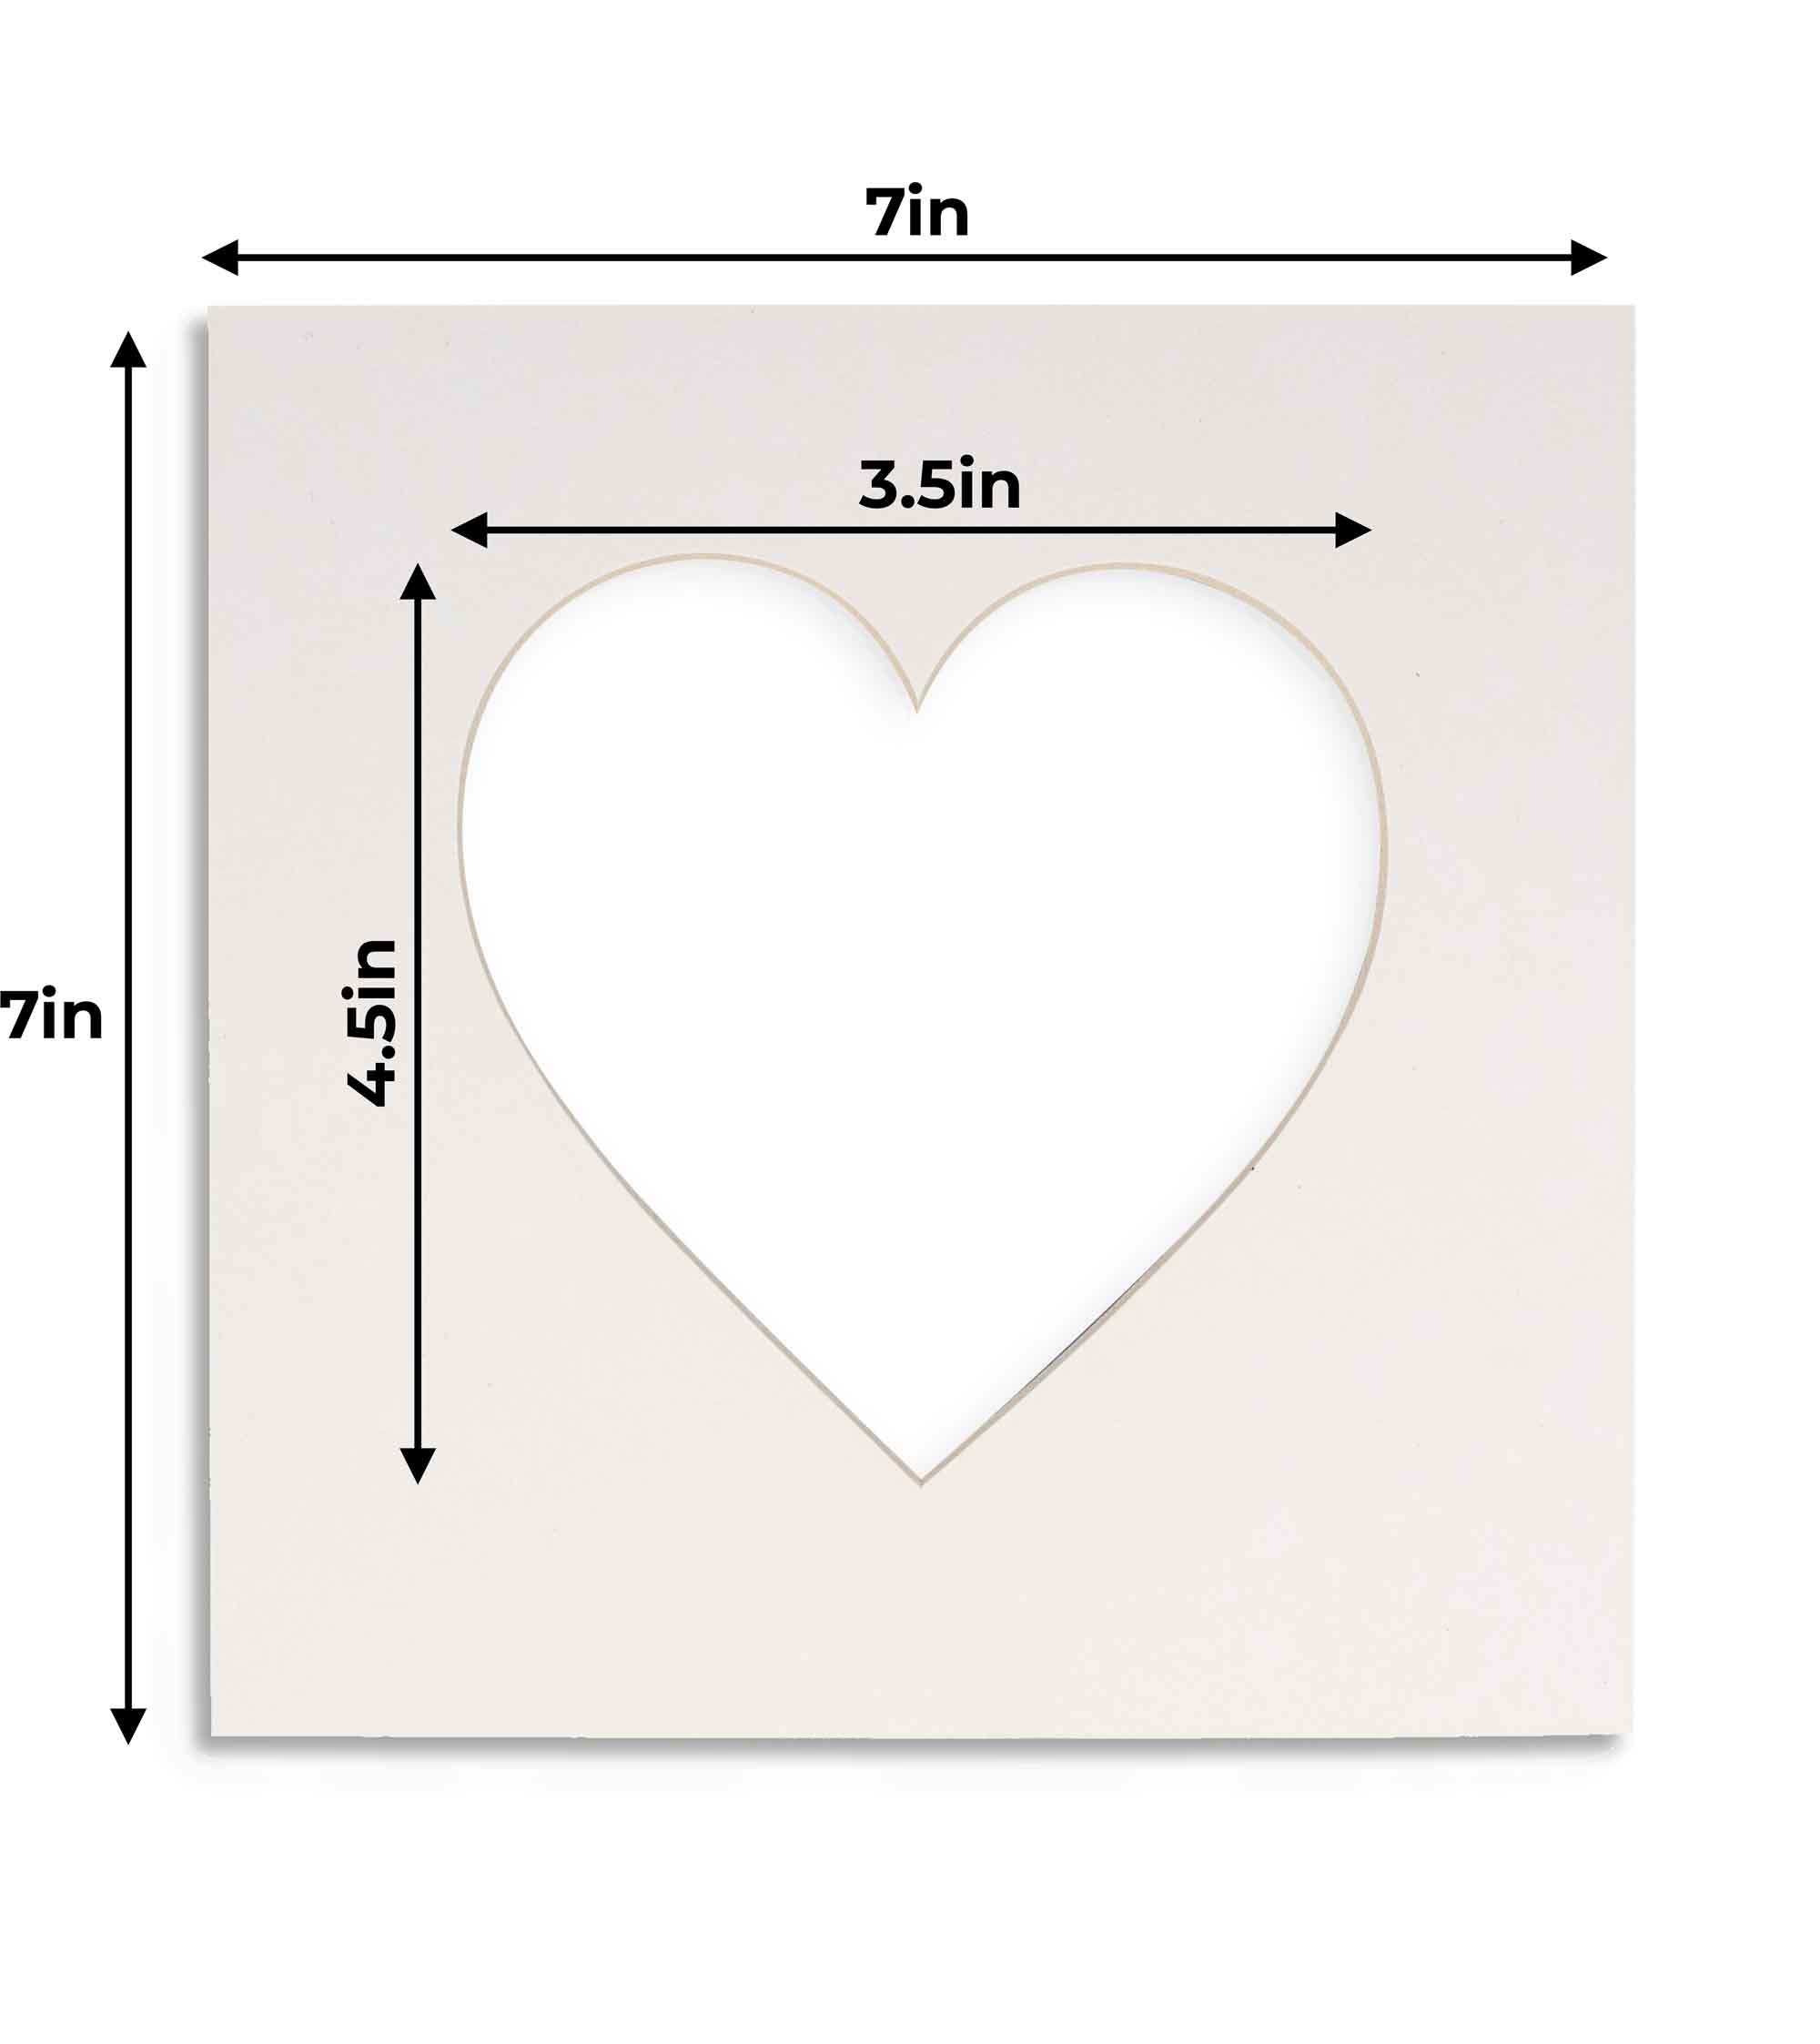 CustomPictureFrames.com Pistachio Acid Free 7x7 Heart Picture Frame Mat with White Core Bevel Cut for 4x5 Pictures - Fits 7x7 Frame